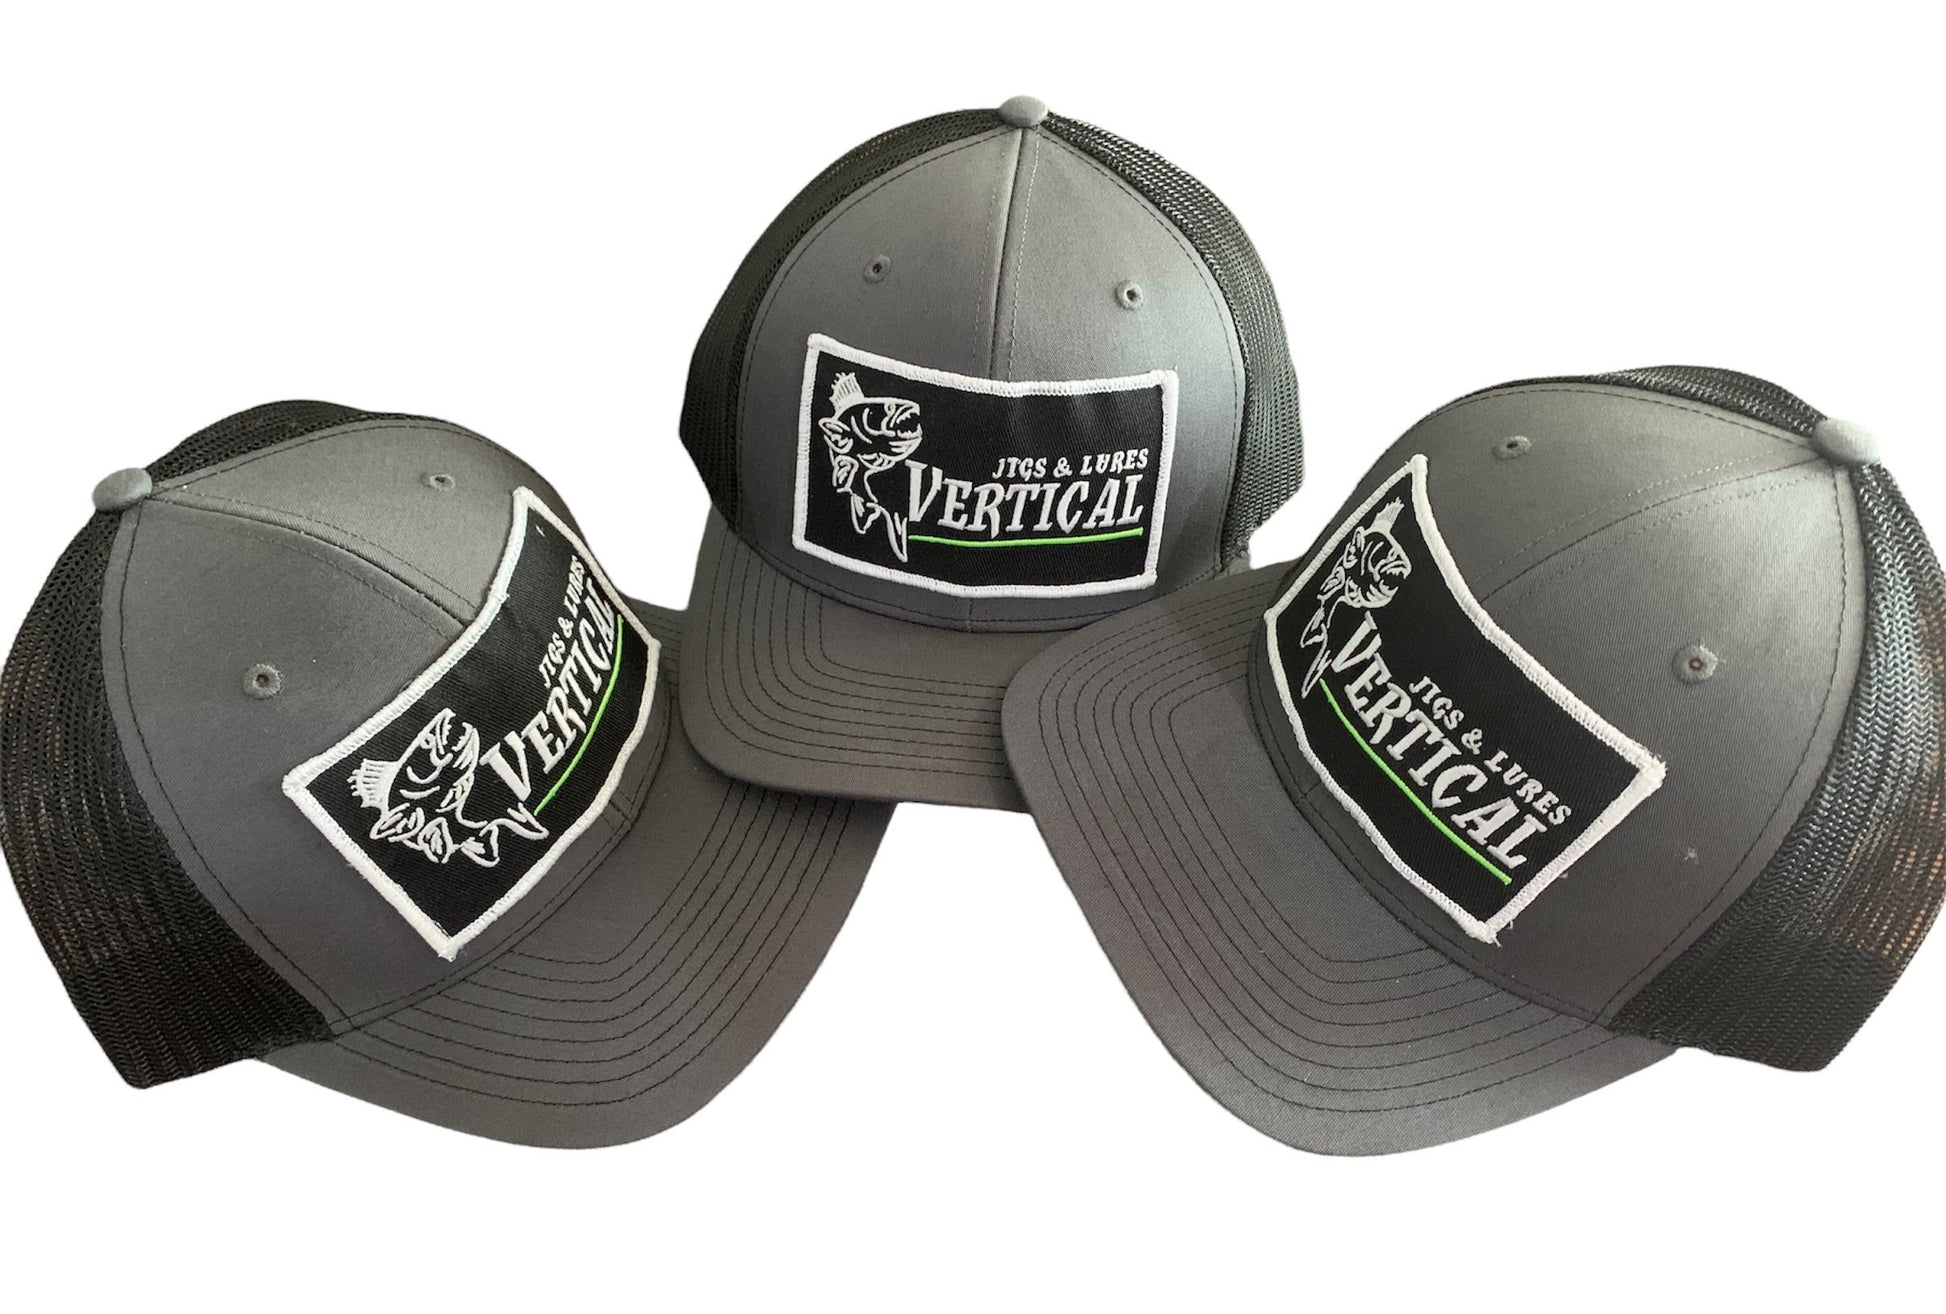 Vertical Snapback Hats – Vertical Jigs and Lures